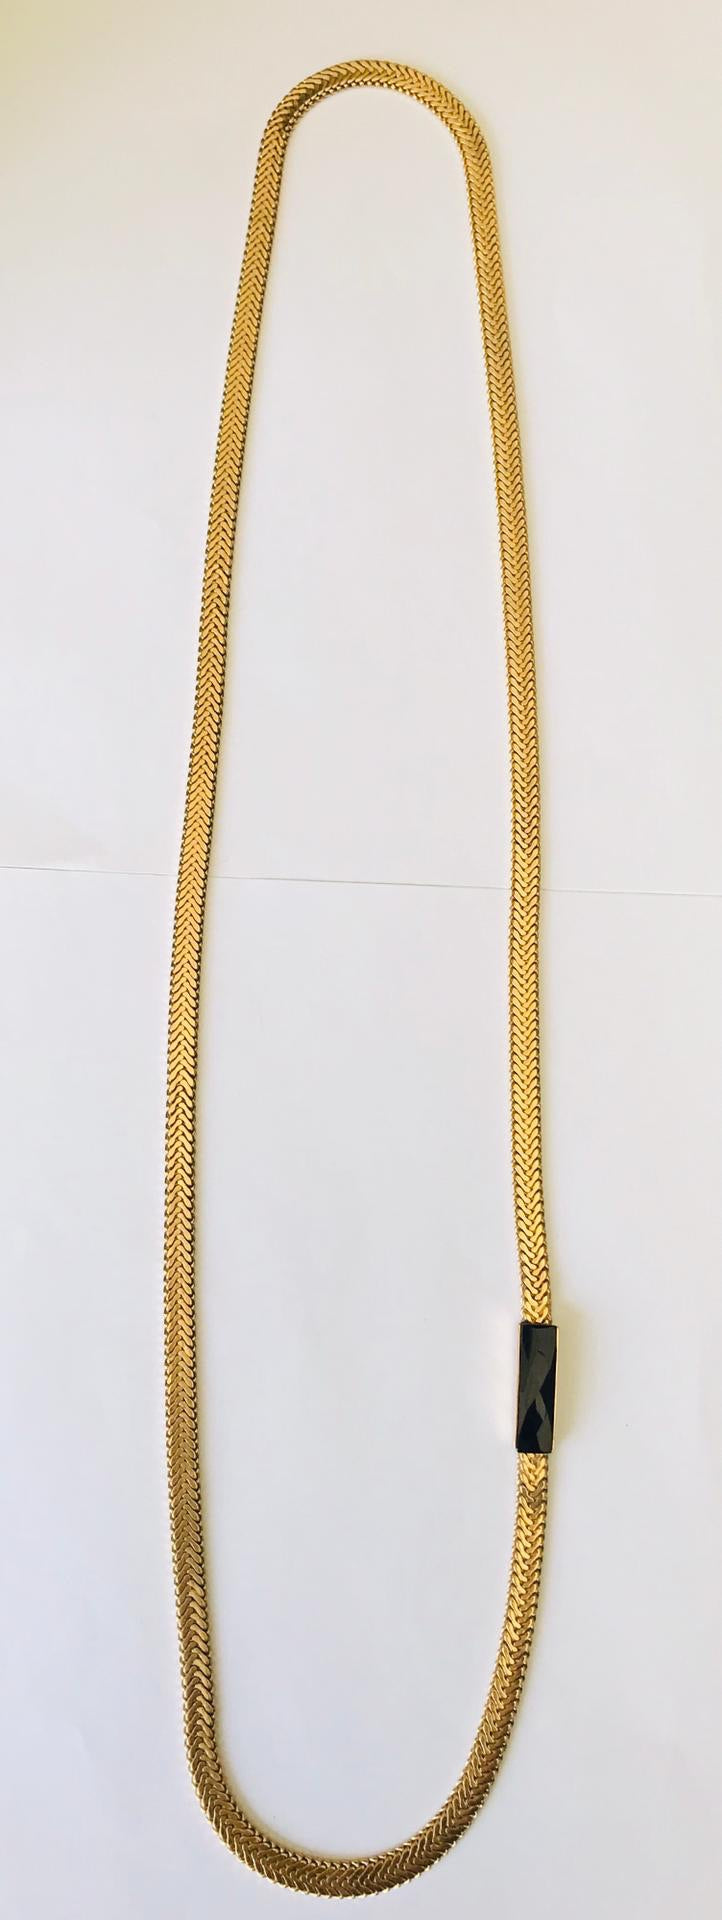 Wouters & Hendrix - long gold plated necklace with faceted onyx stone